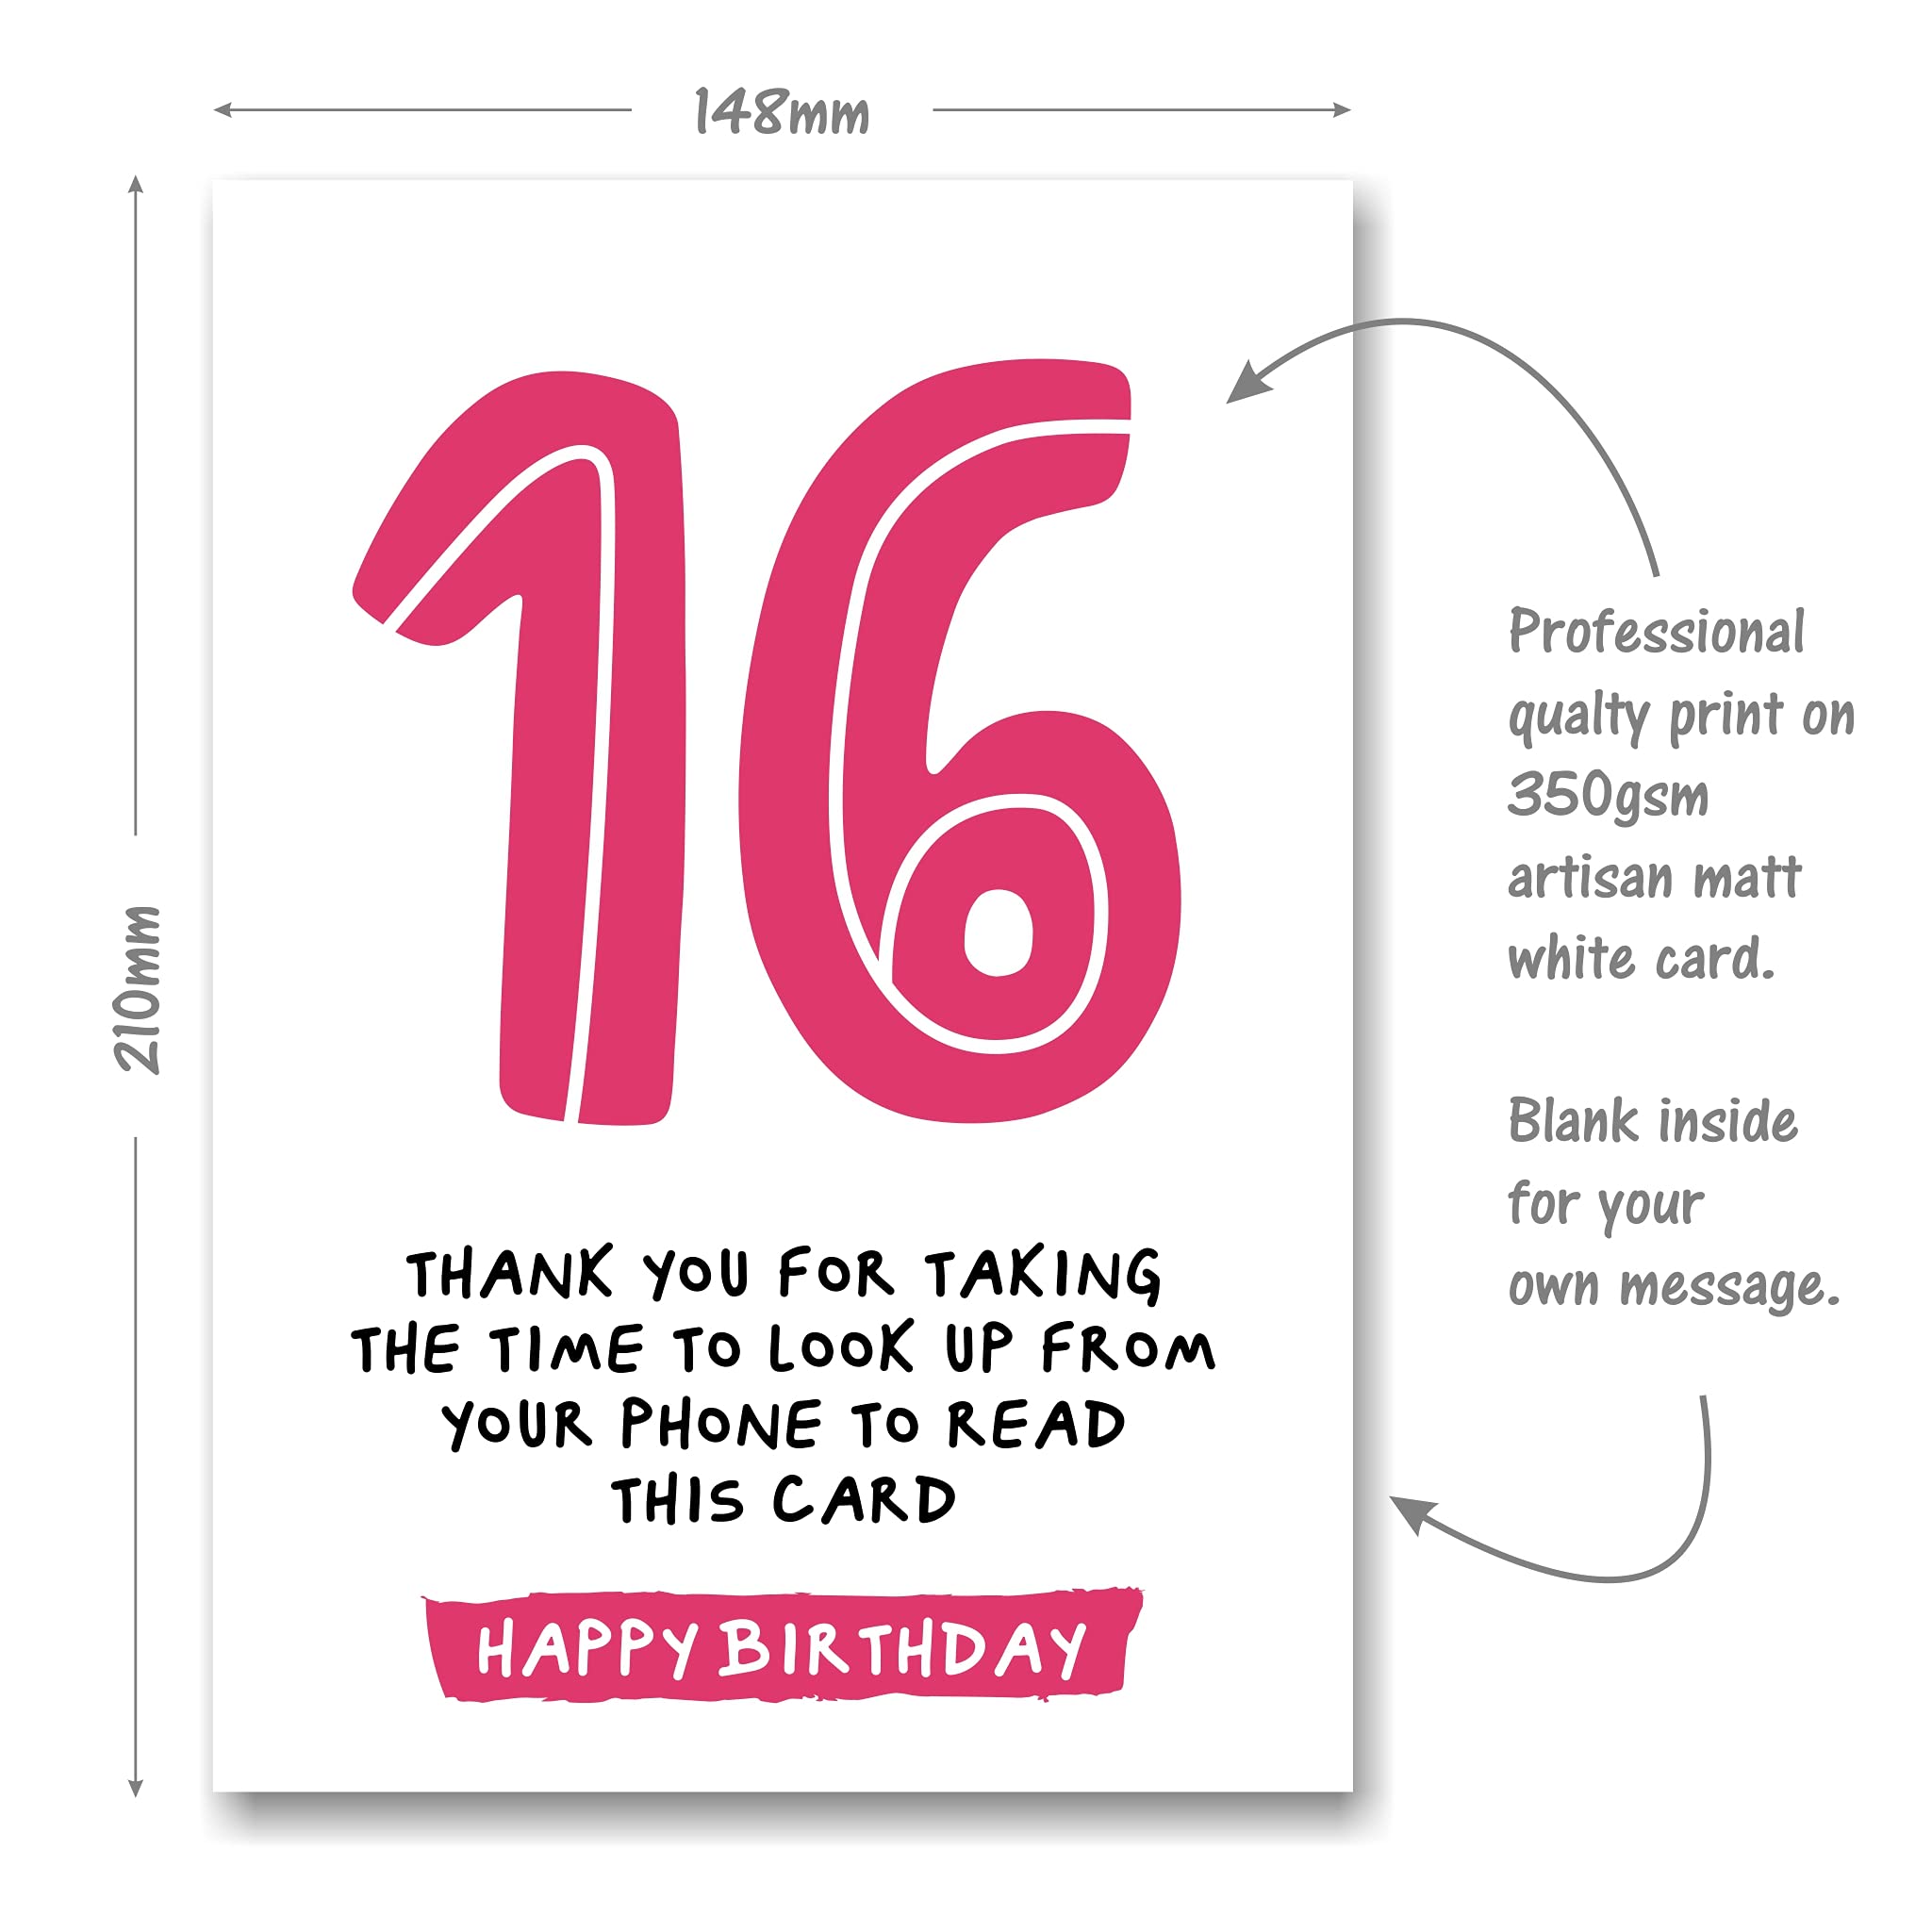 16th Birthday Card - Funny Joke for 16 Year Old - Pink